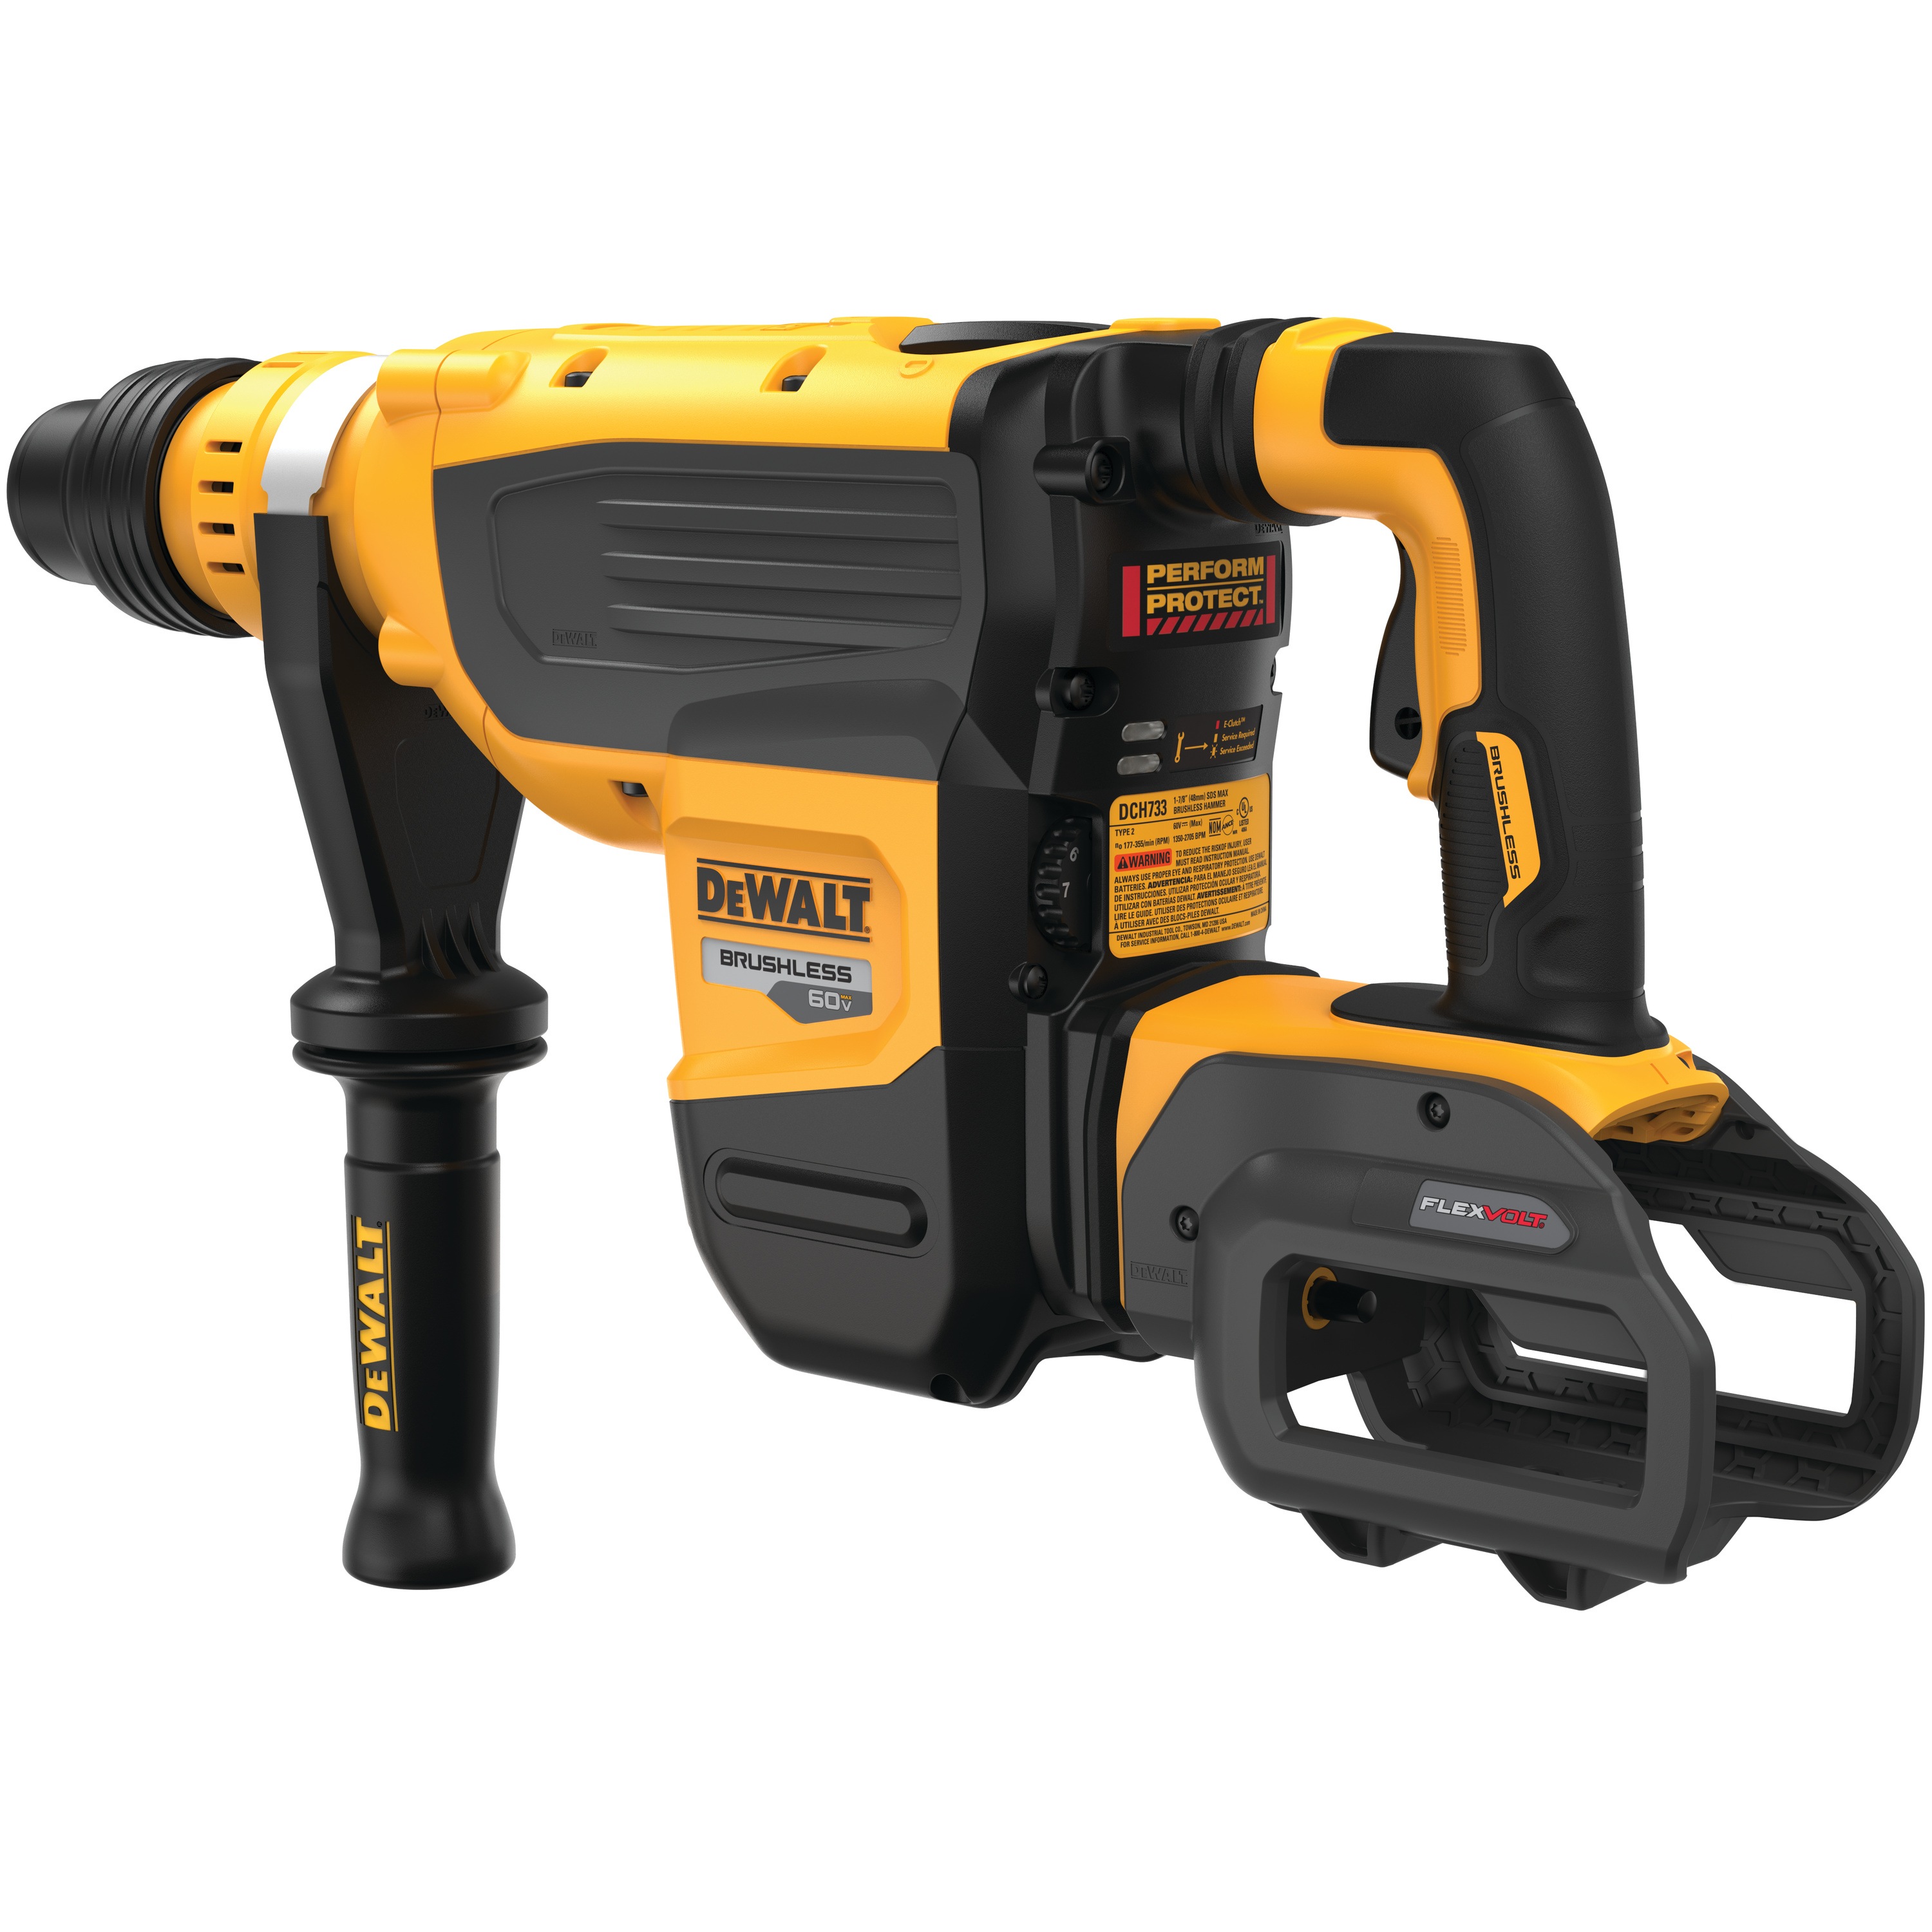 DEWALT - 60V MAX 178 in Brushless Cordless SDS MAX Combination Rotary Hammer Tool Only - DCH733B